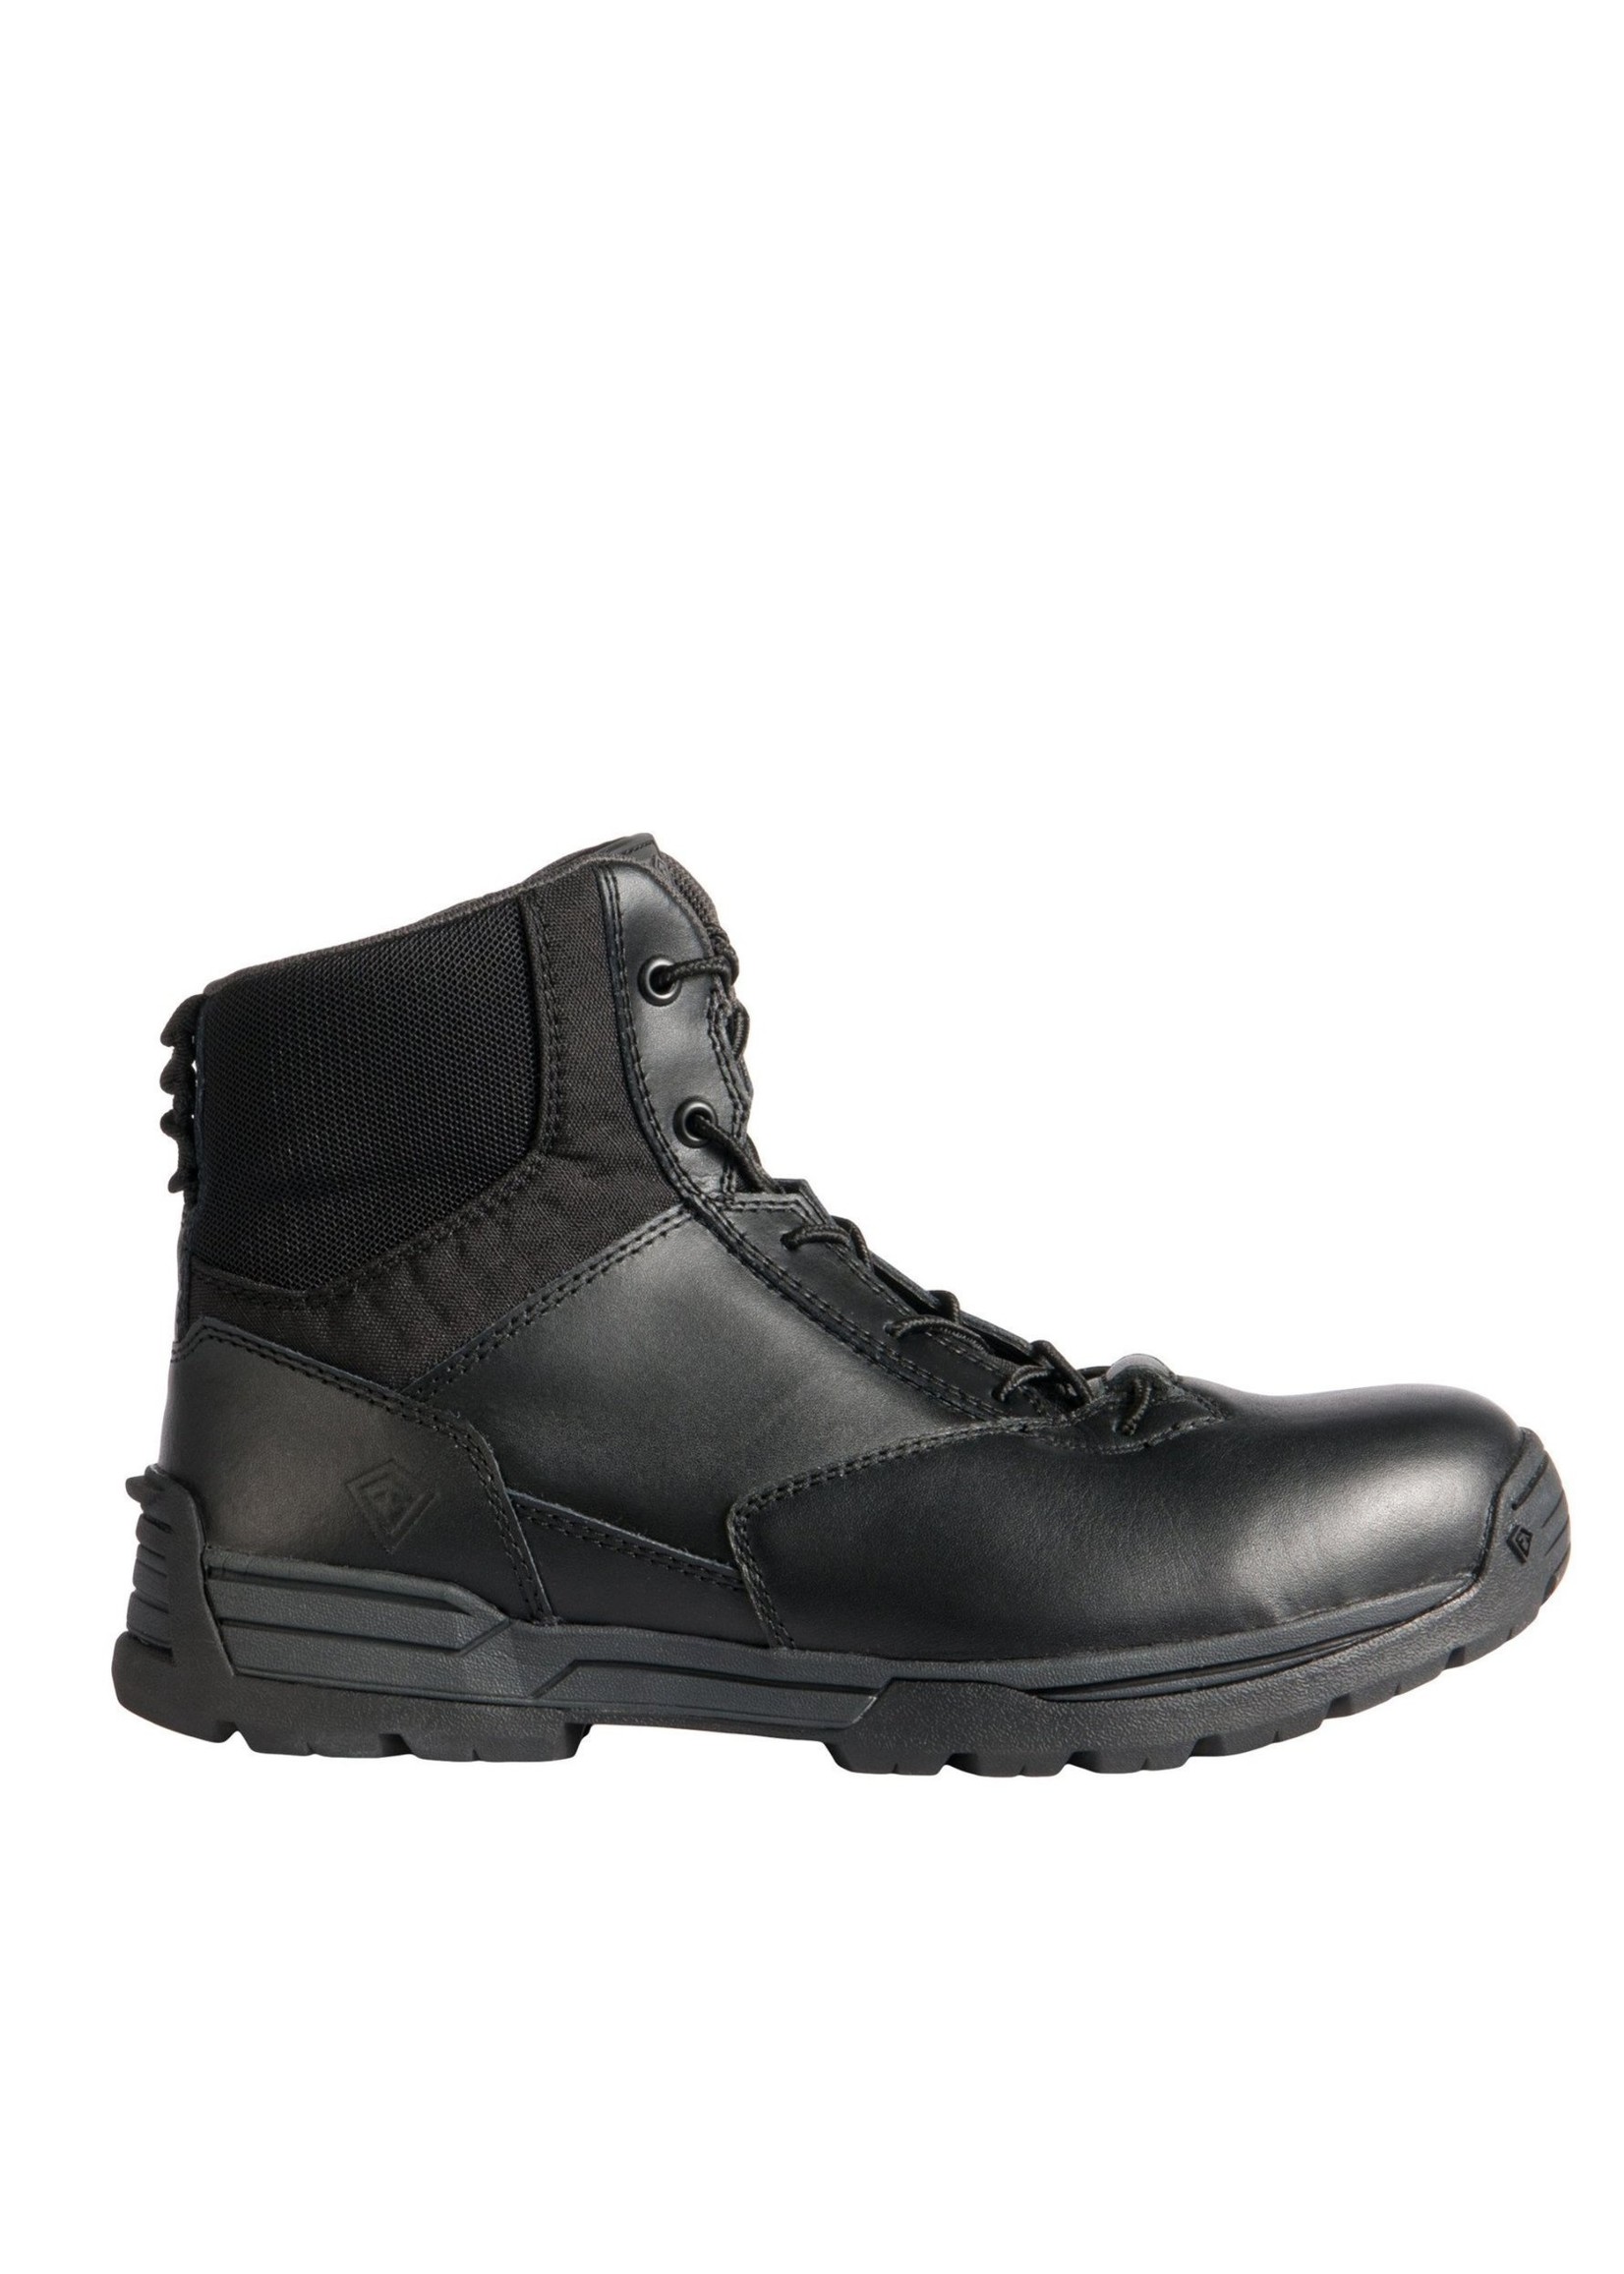 First Tactical First Tactical Men's 6" Side-Zip Duty Boot Black